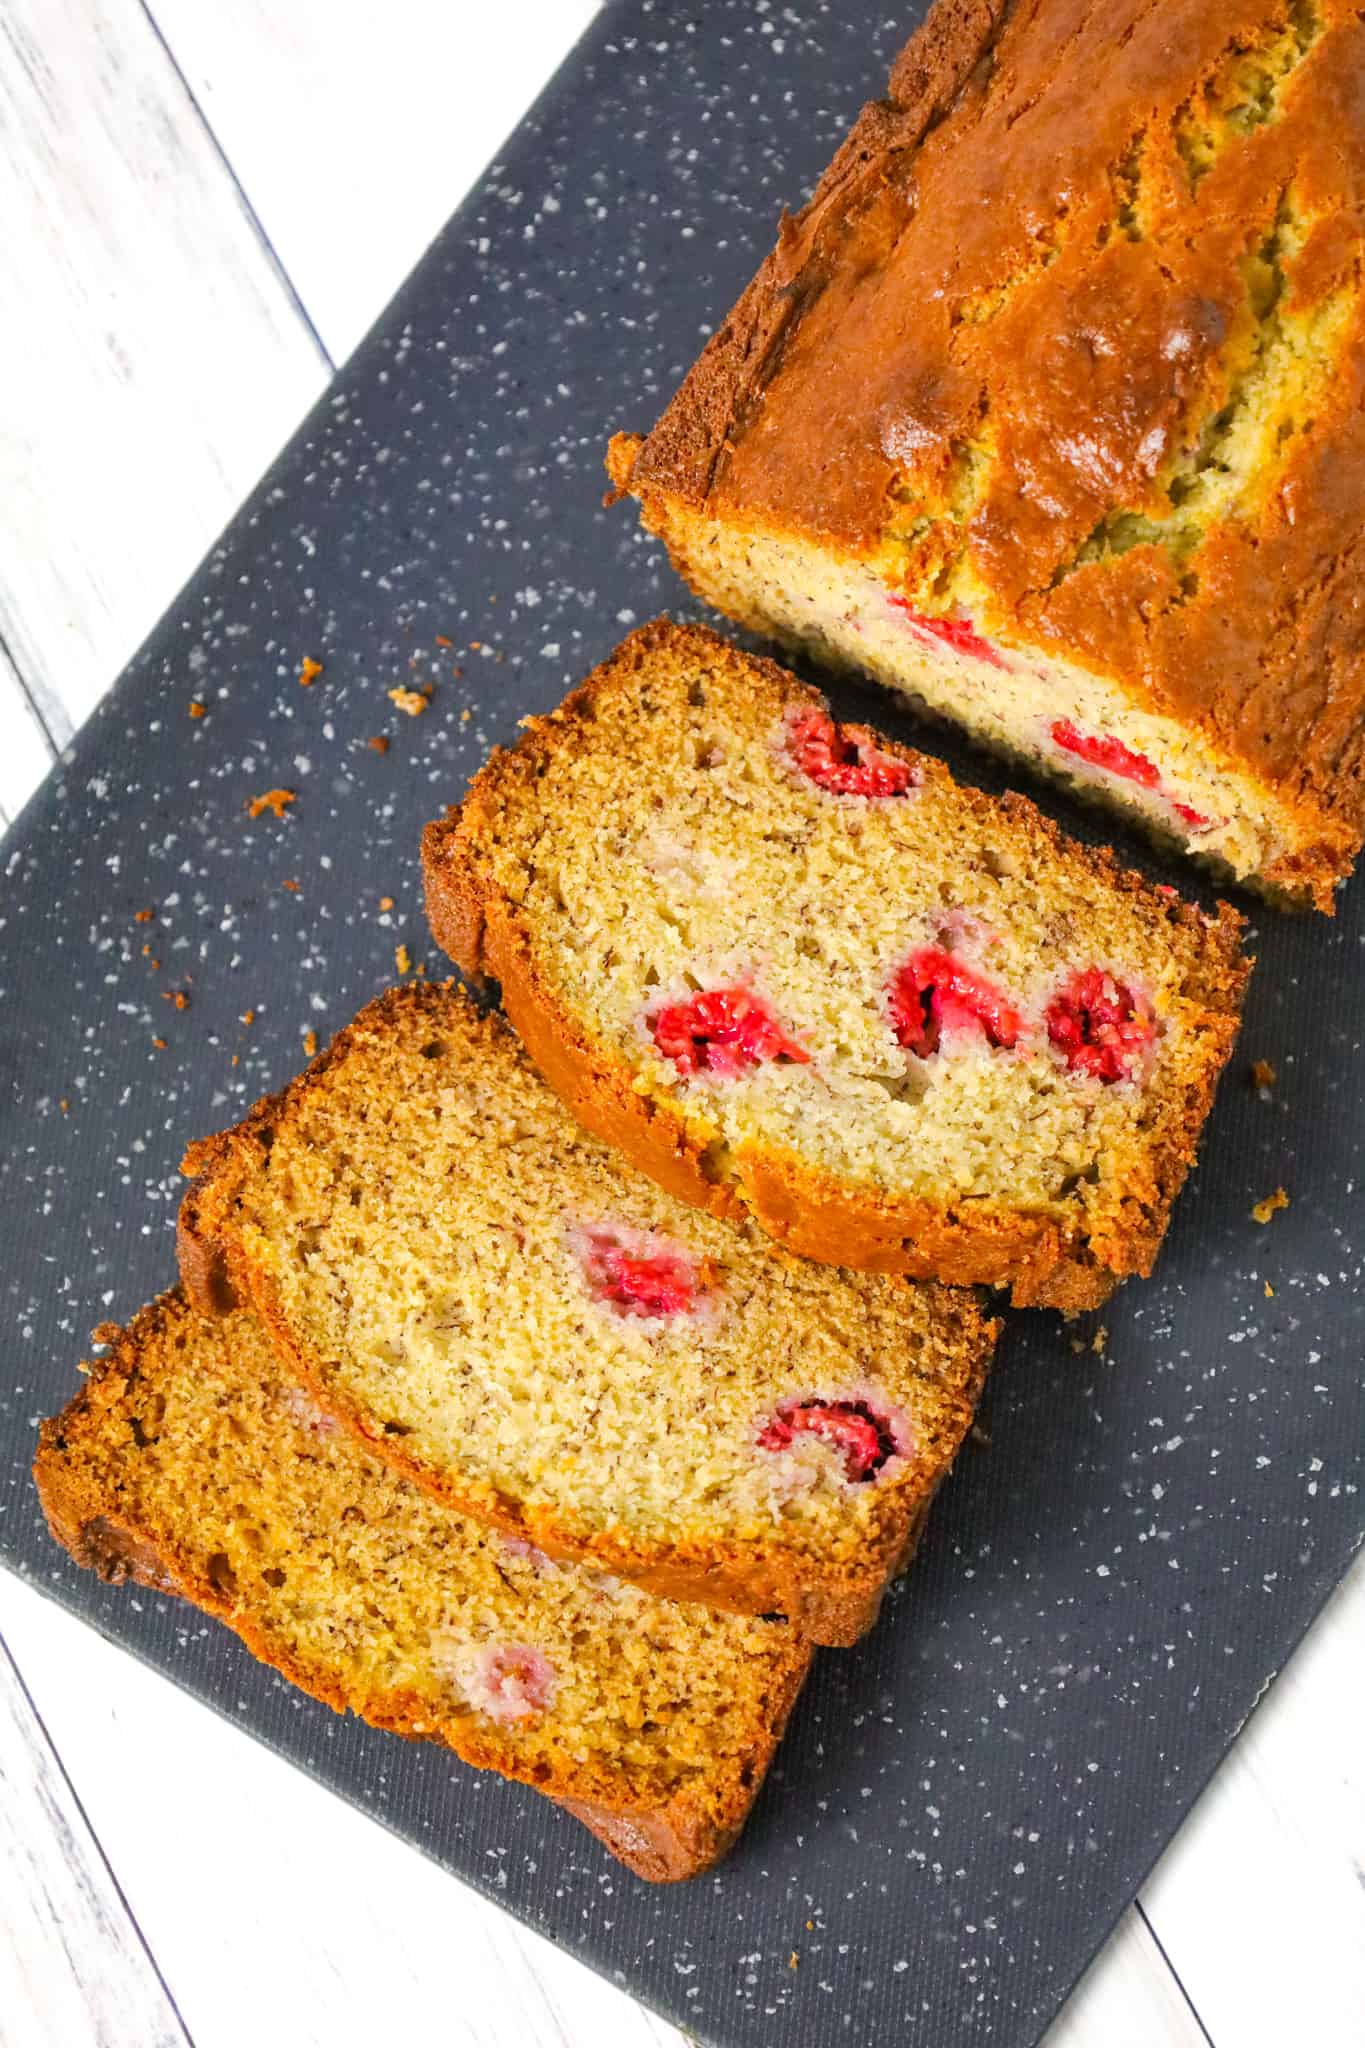 Raspberry Banana Bread is a tasty treat made with ripe bananas and loaded with fresh raspberries.